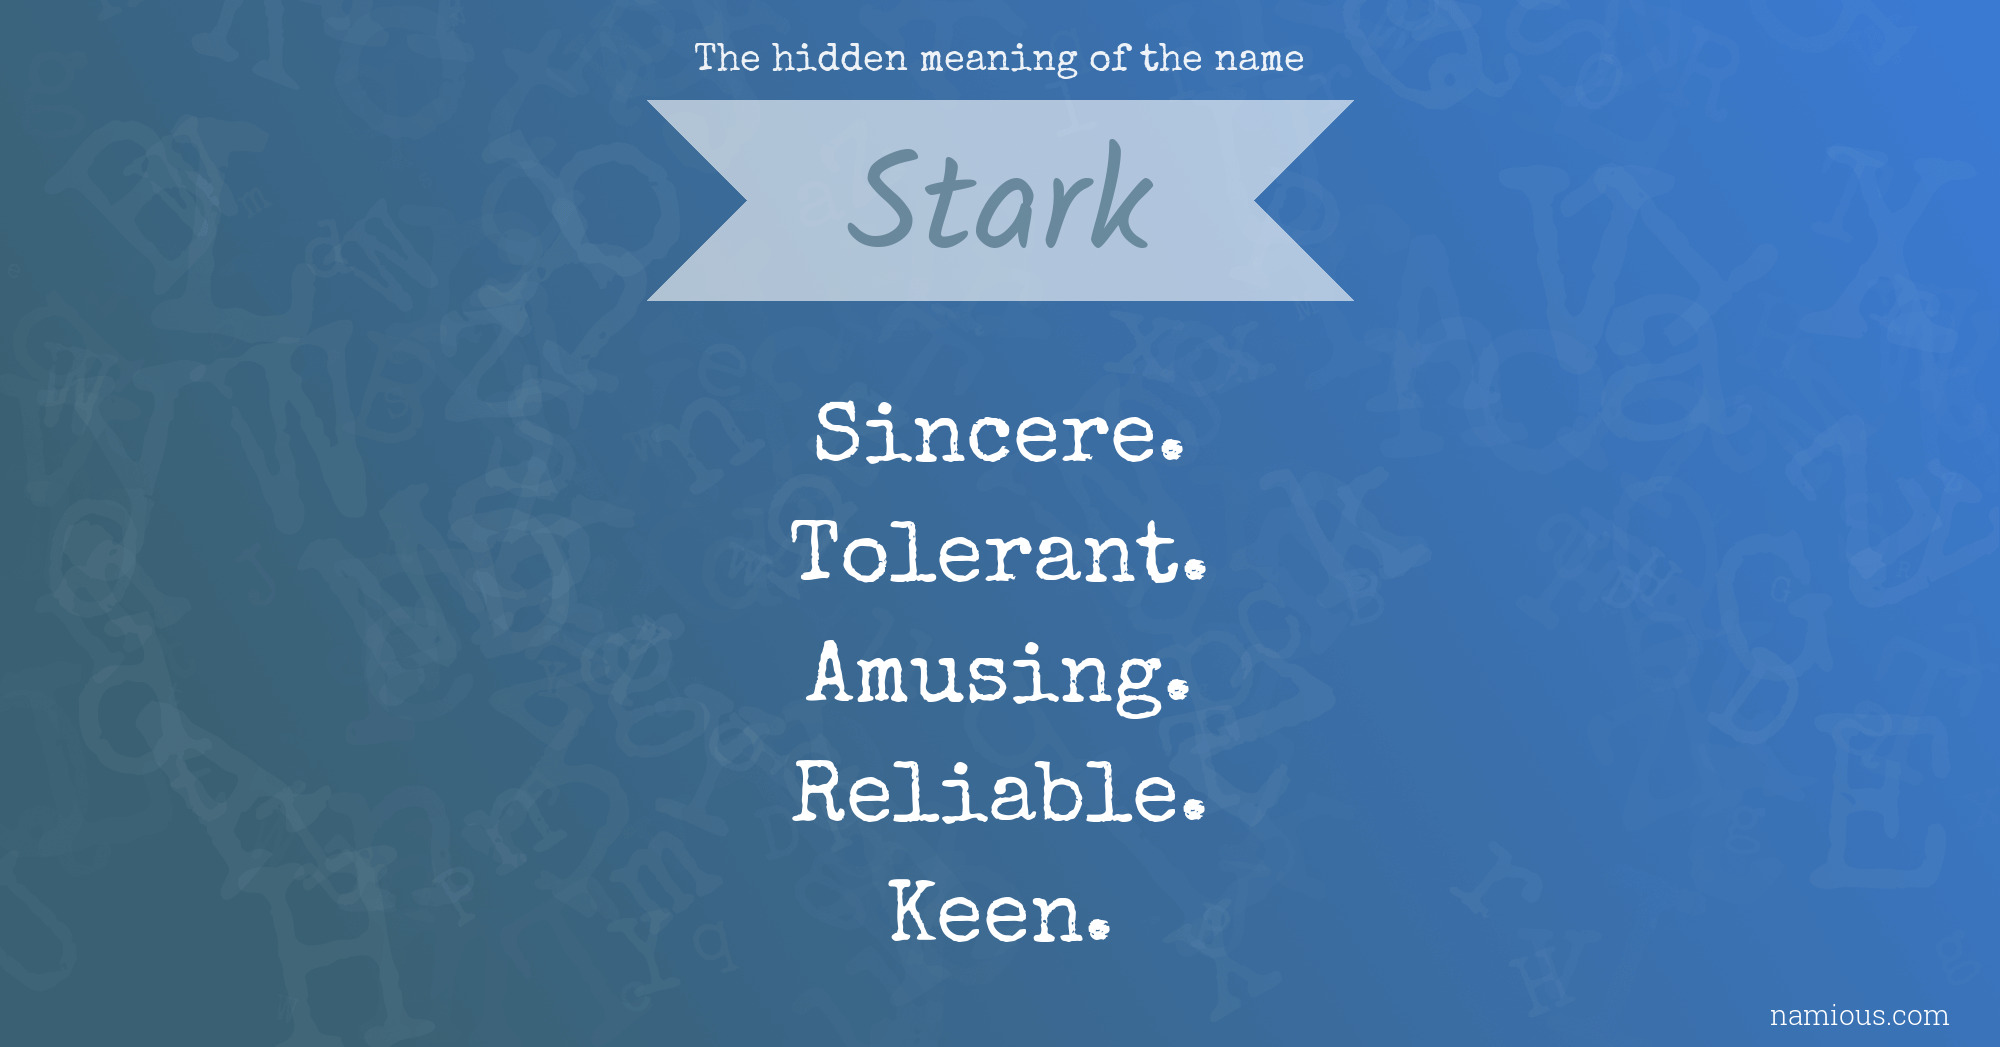 The hidden meaning of the name Stark